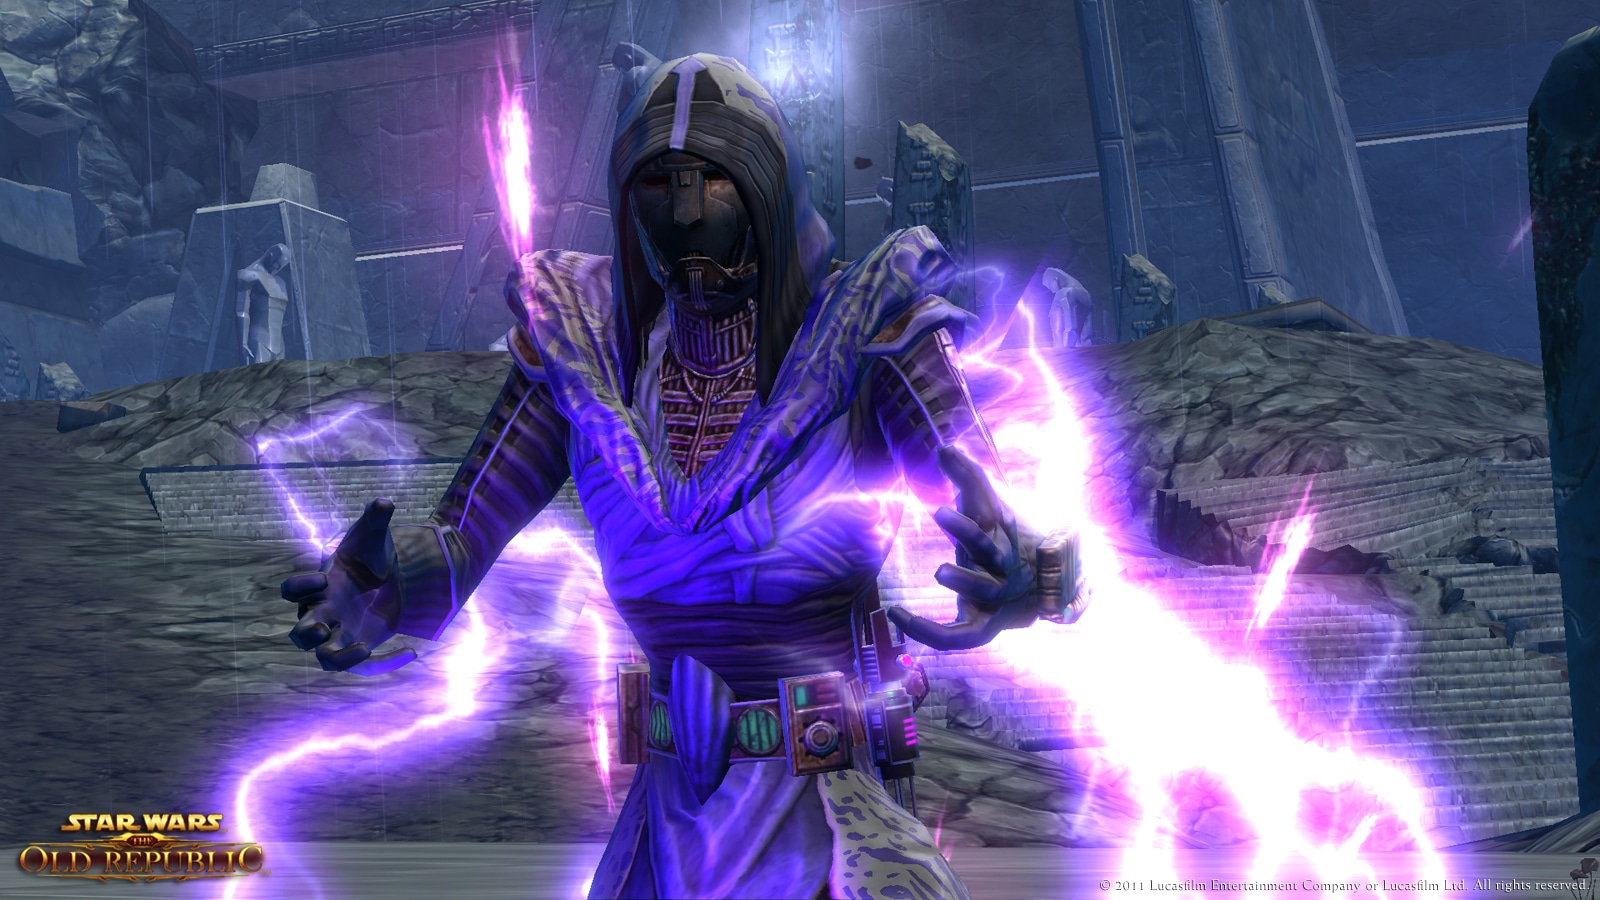 Swtor Sith Inquisitor Assassin Pvp Build For 1 2 Star Wars Gaming